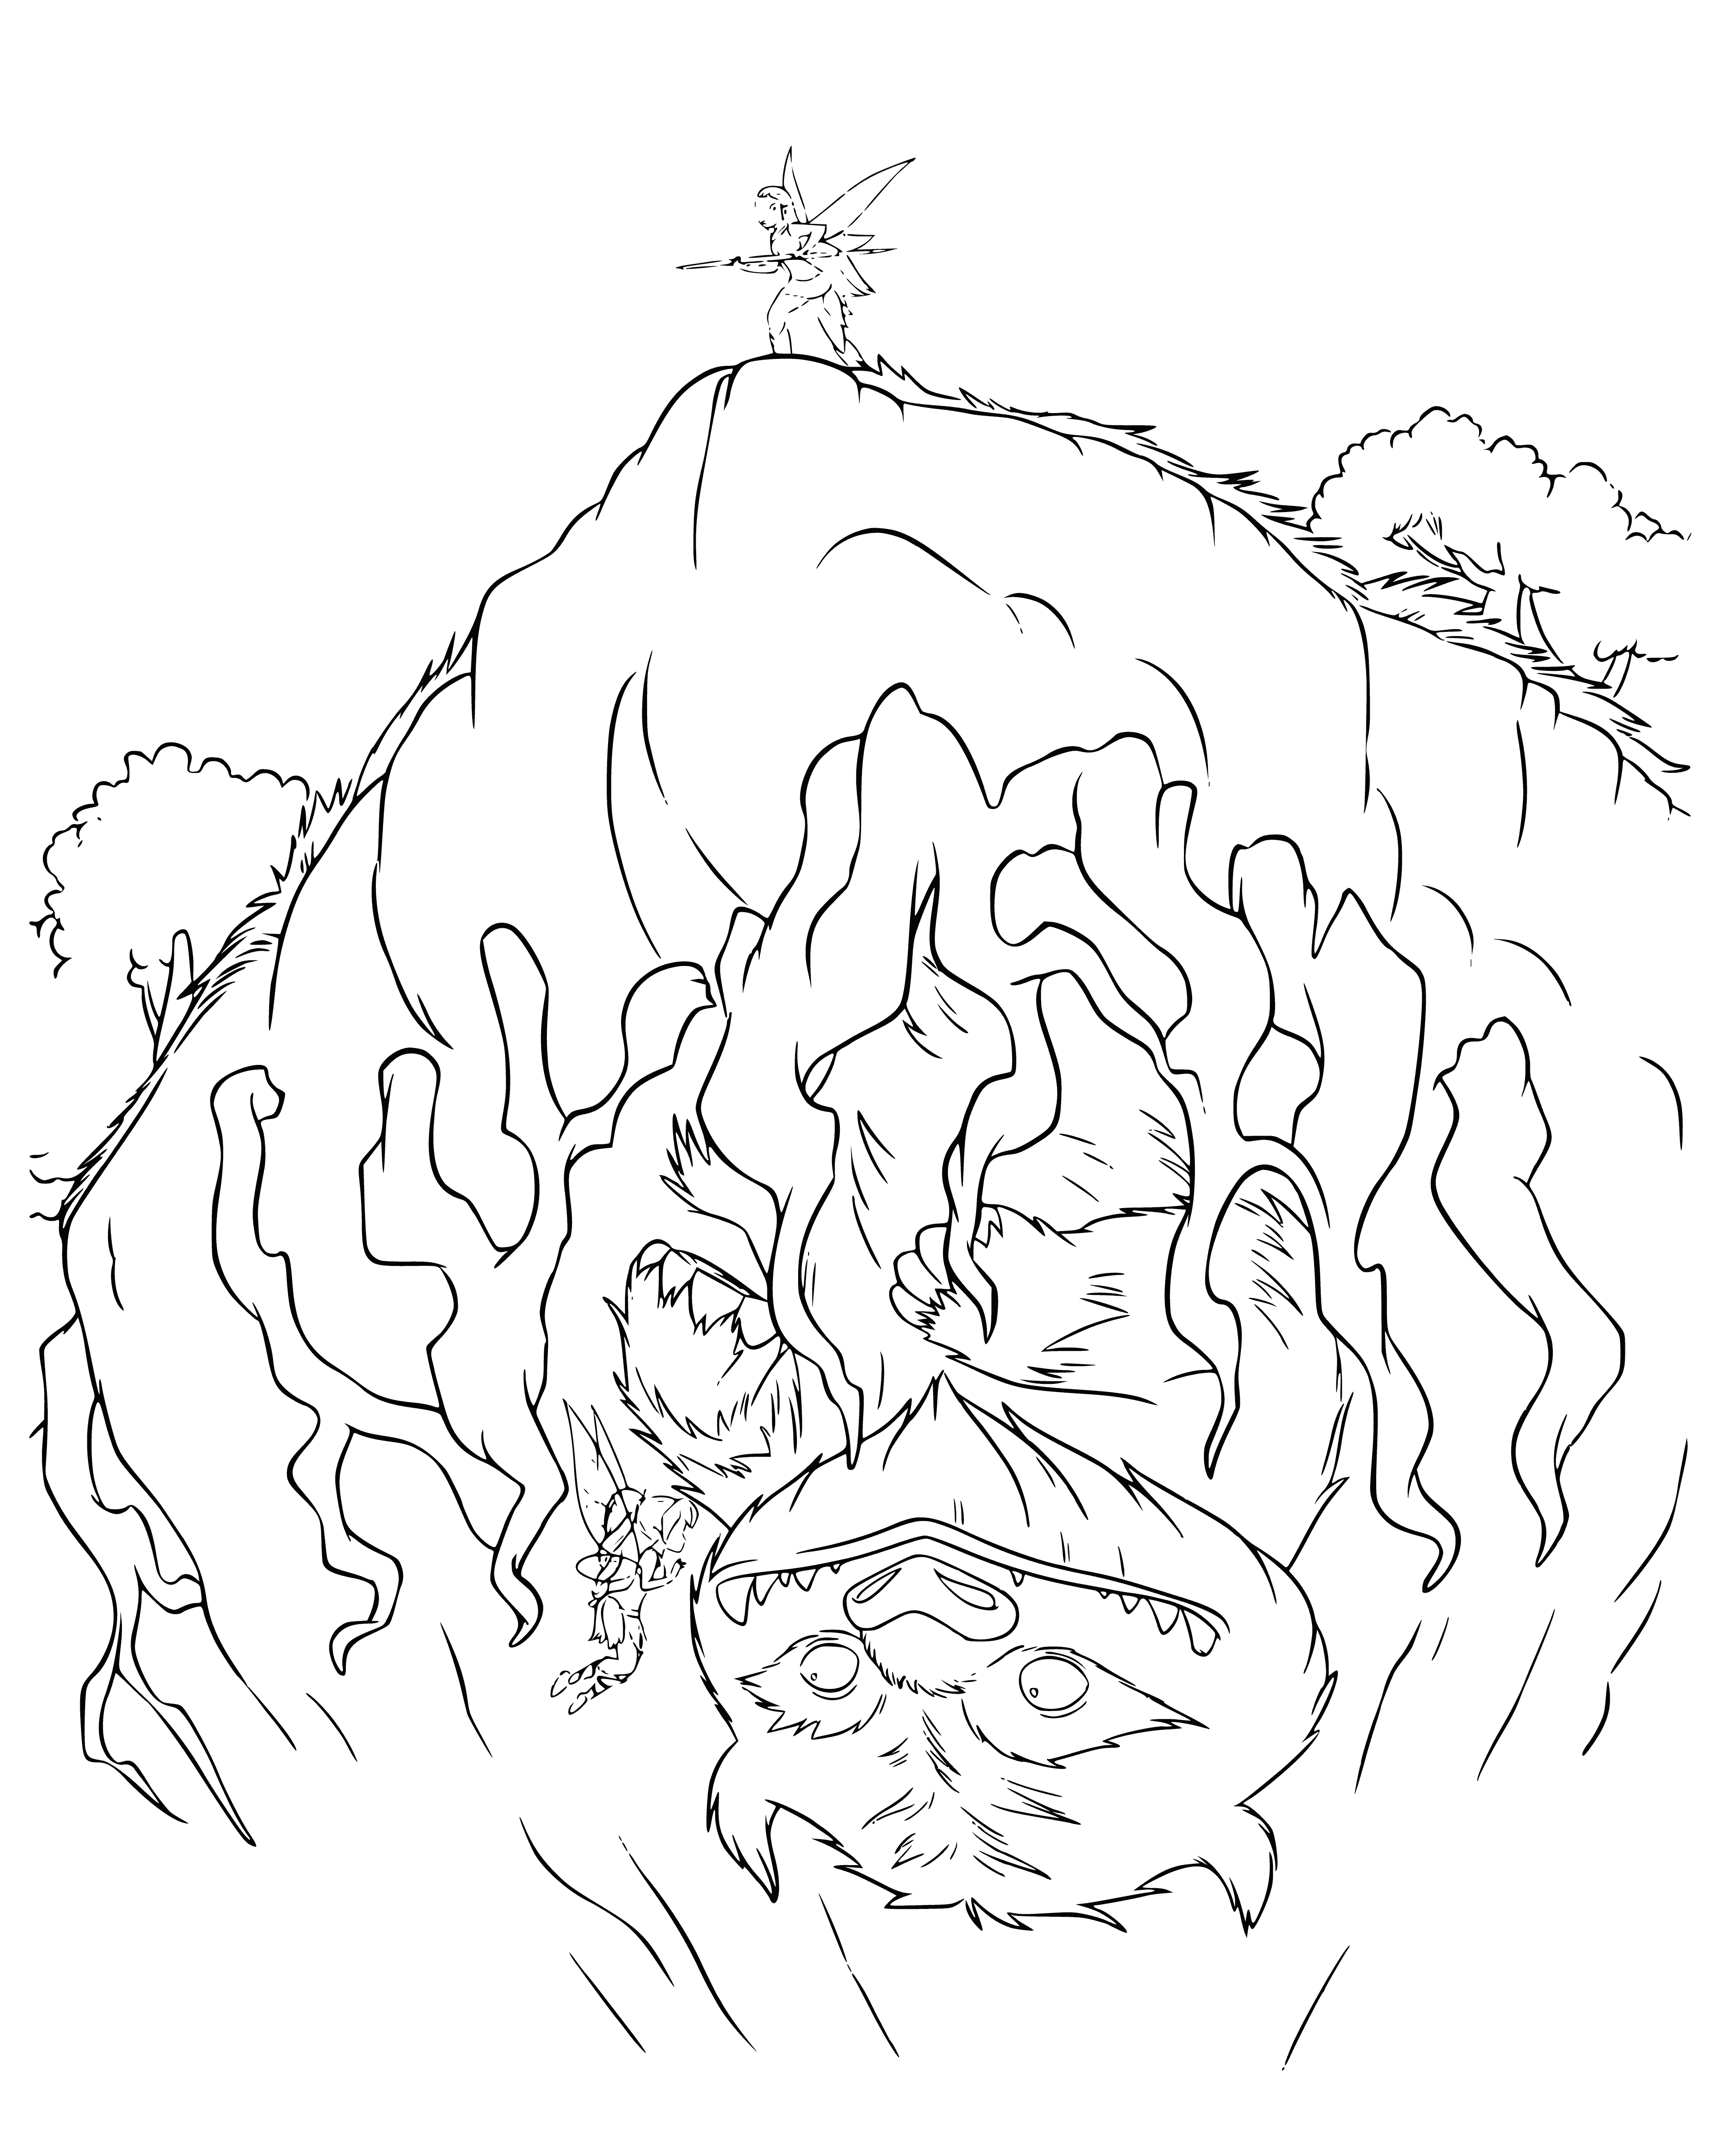 The monster hid from the fairies-hunters coloring page